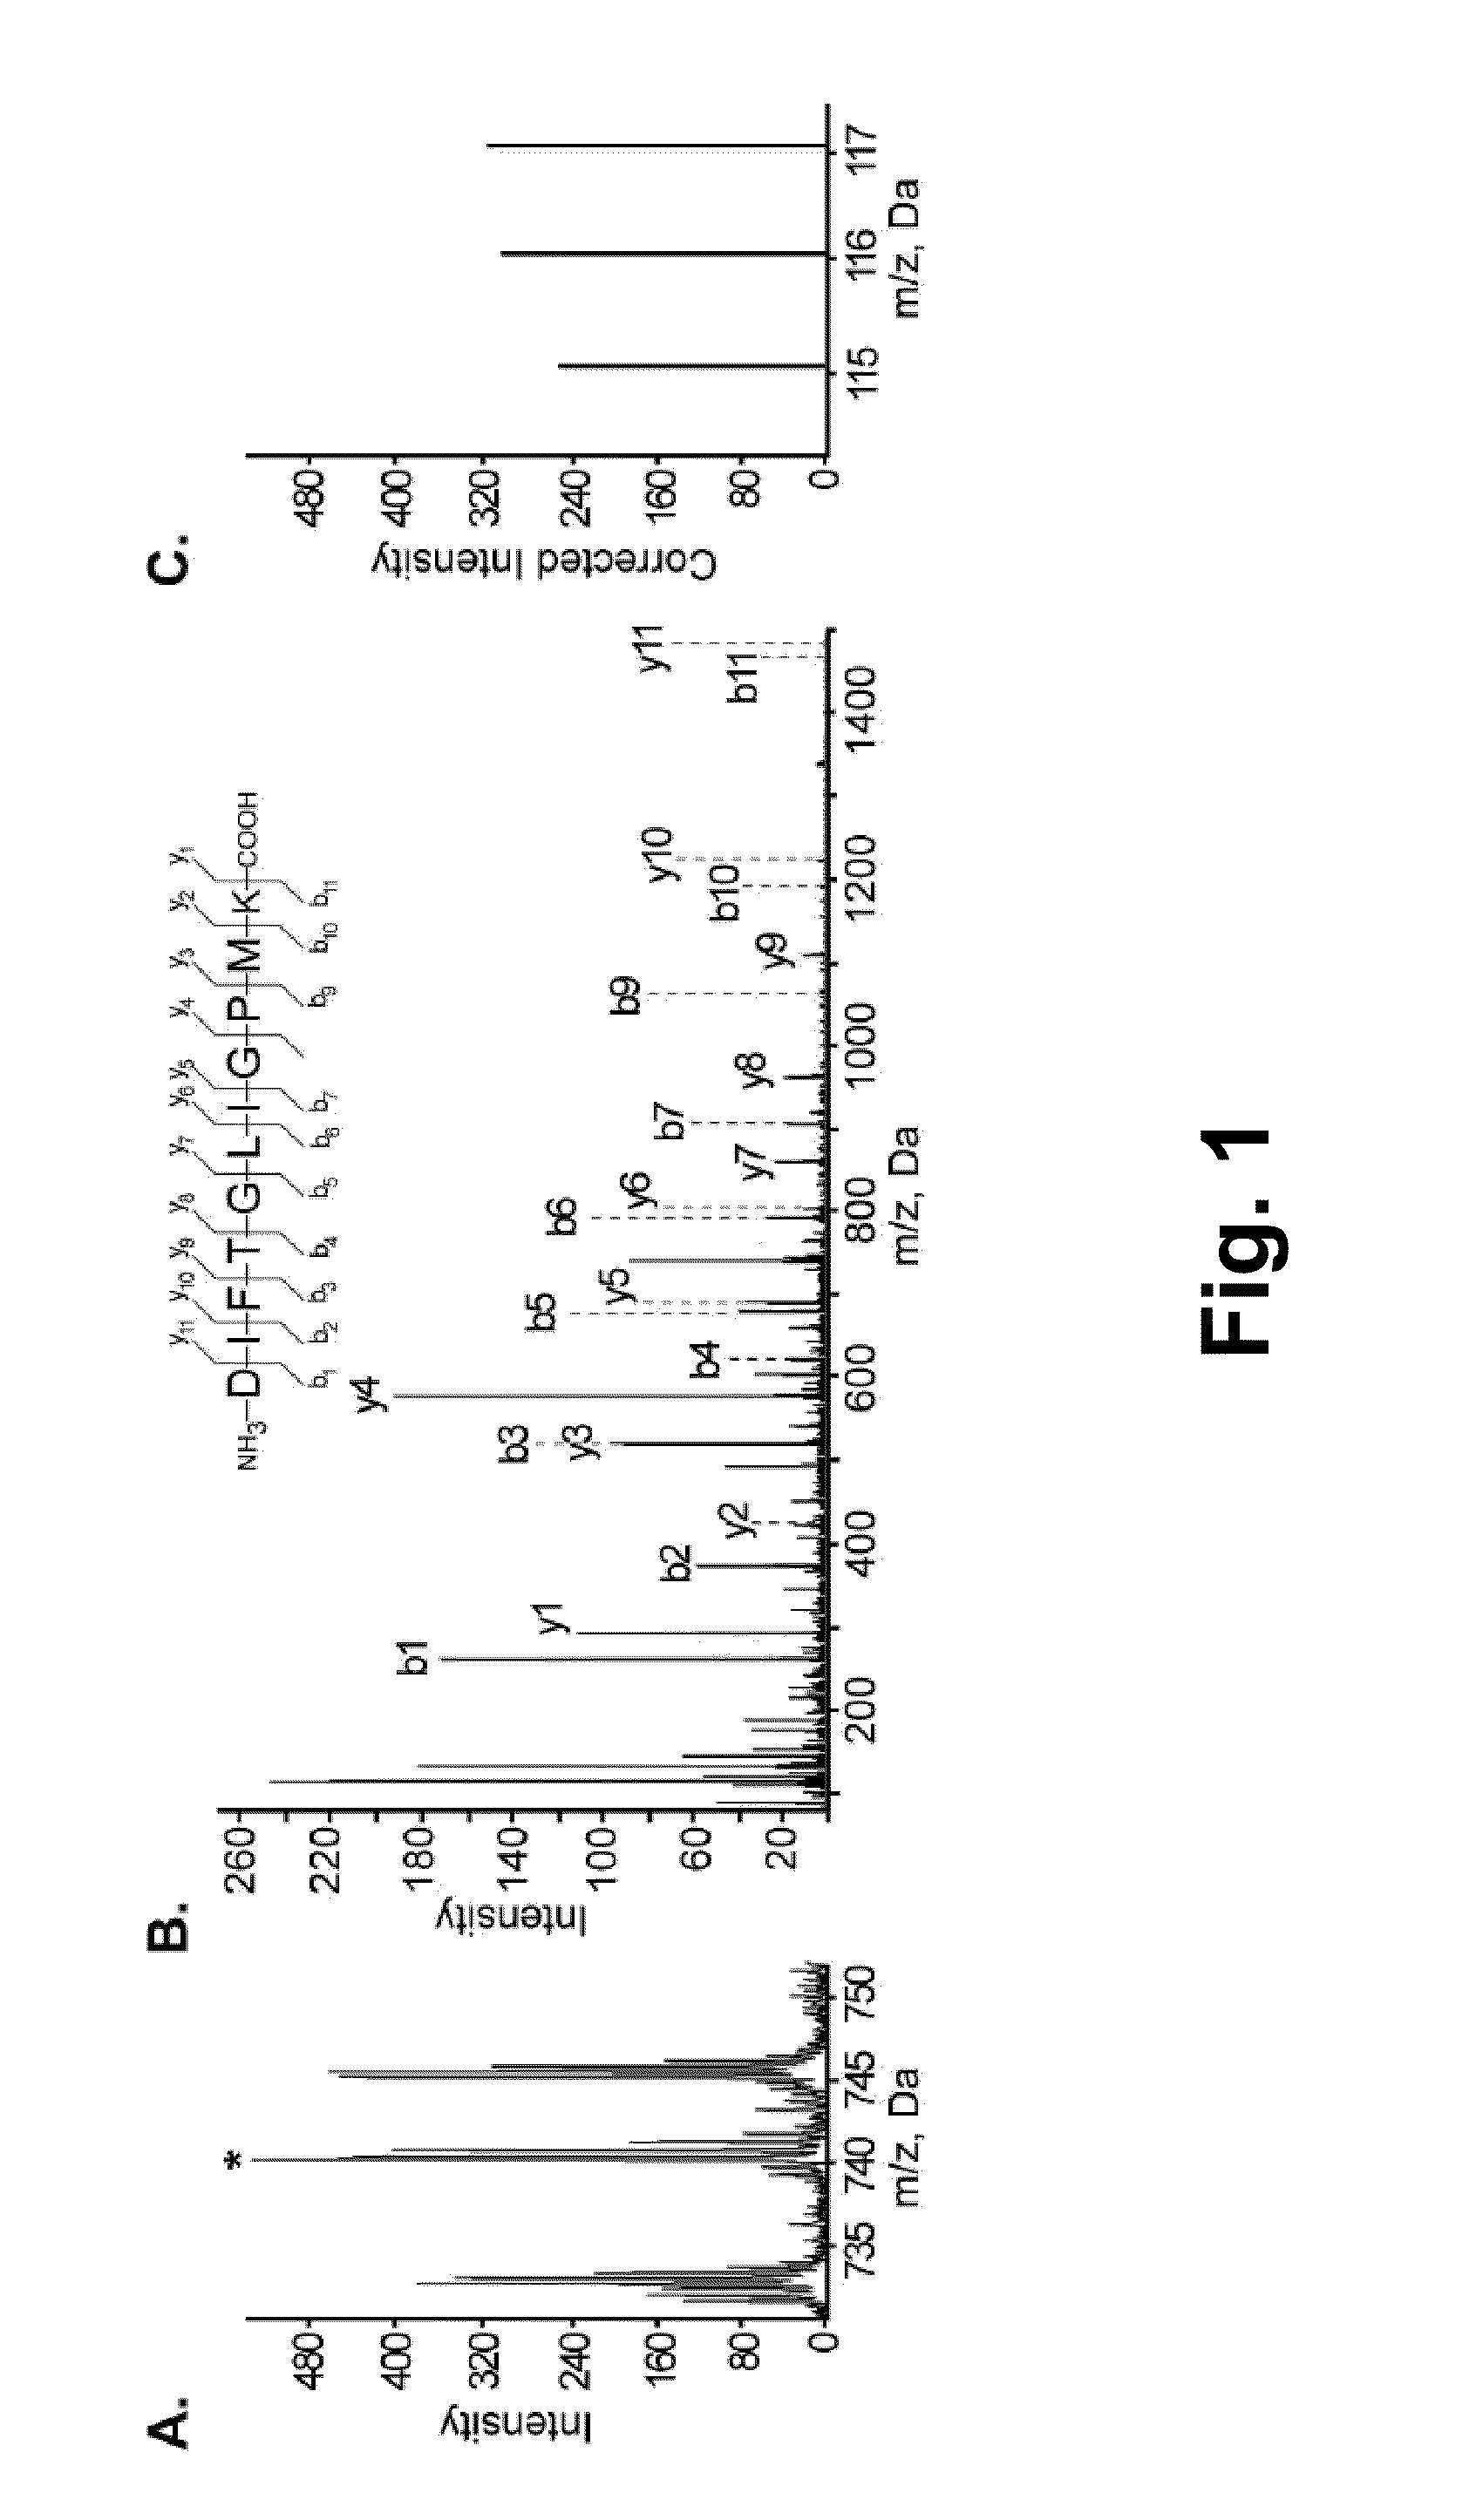 Method for Identifying Mammals at Risk for Elevated intracranial Pressure